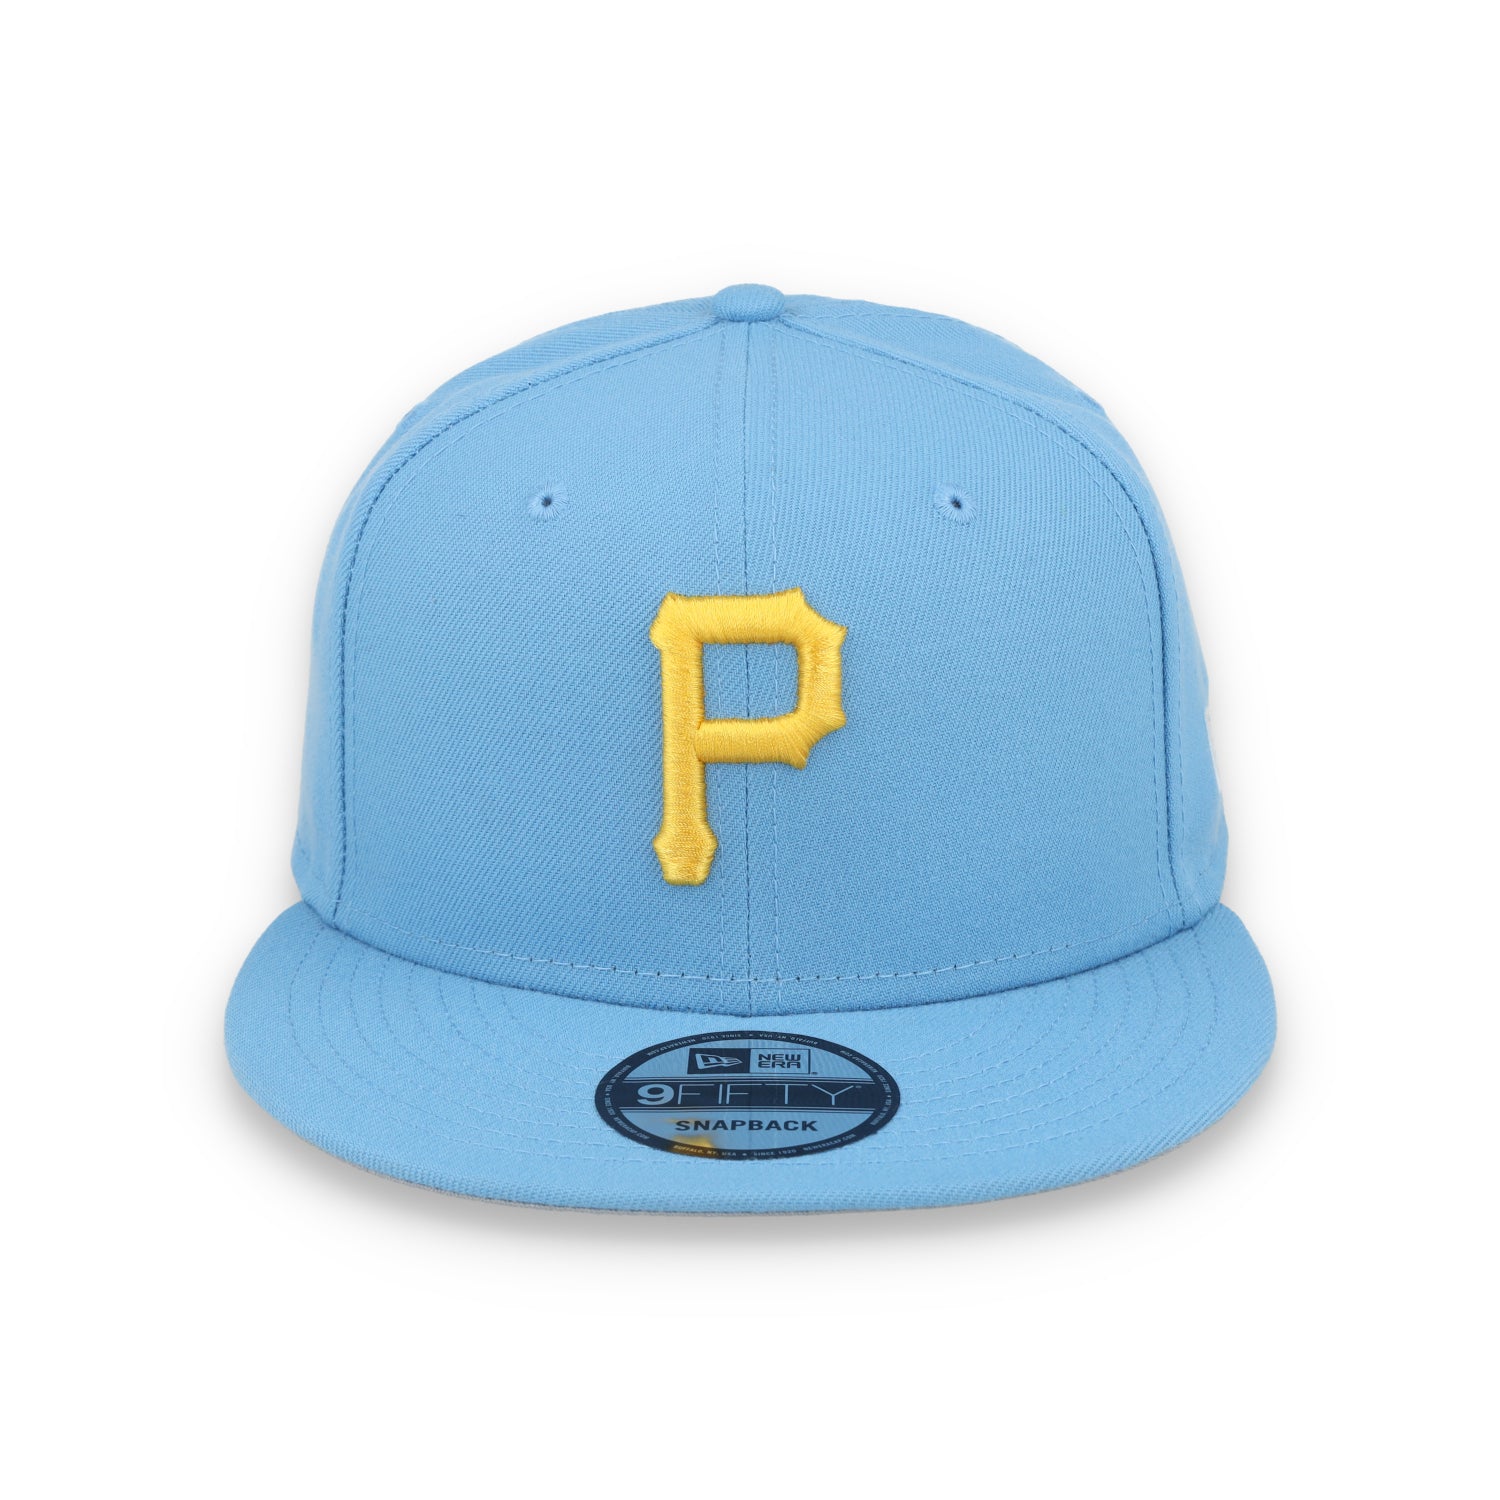 New Era Pittsburgh Pirates Game Day 9FIFTY Snapback Hat - evergreen